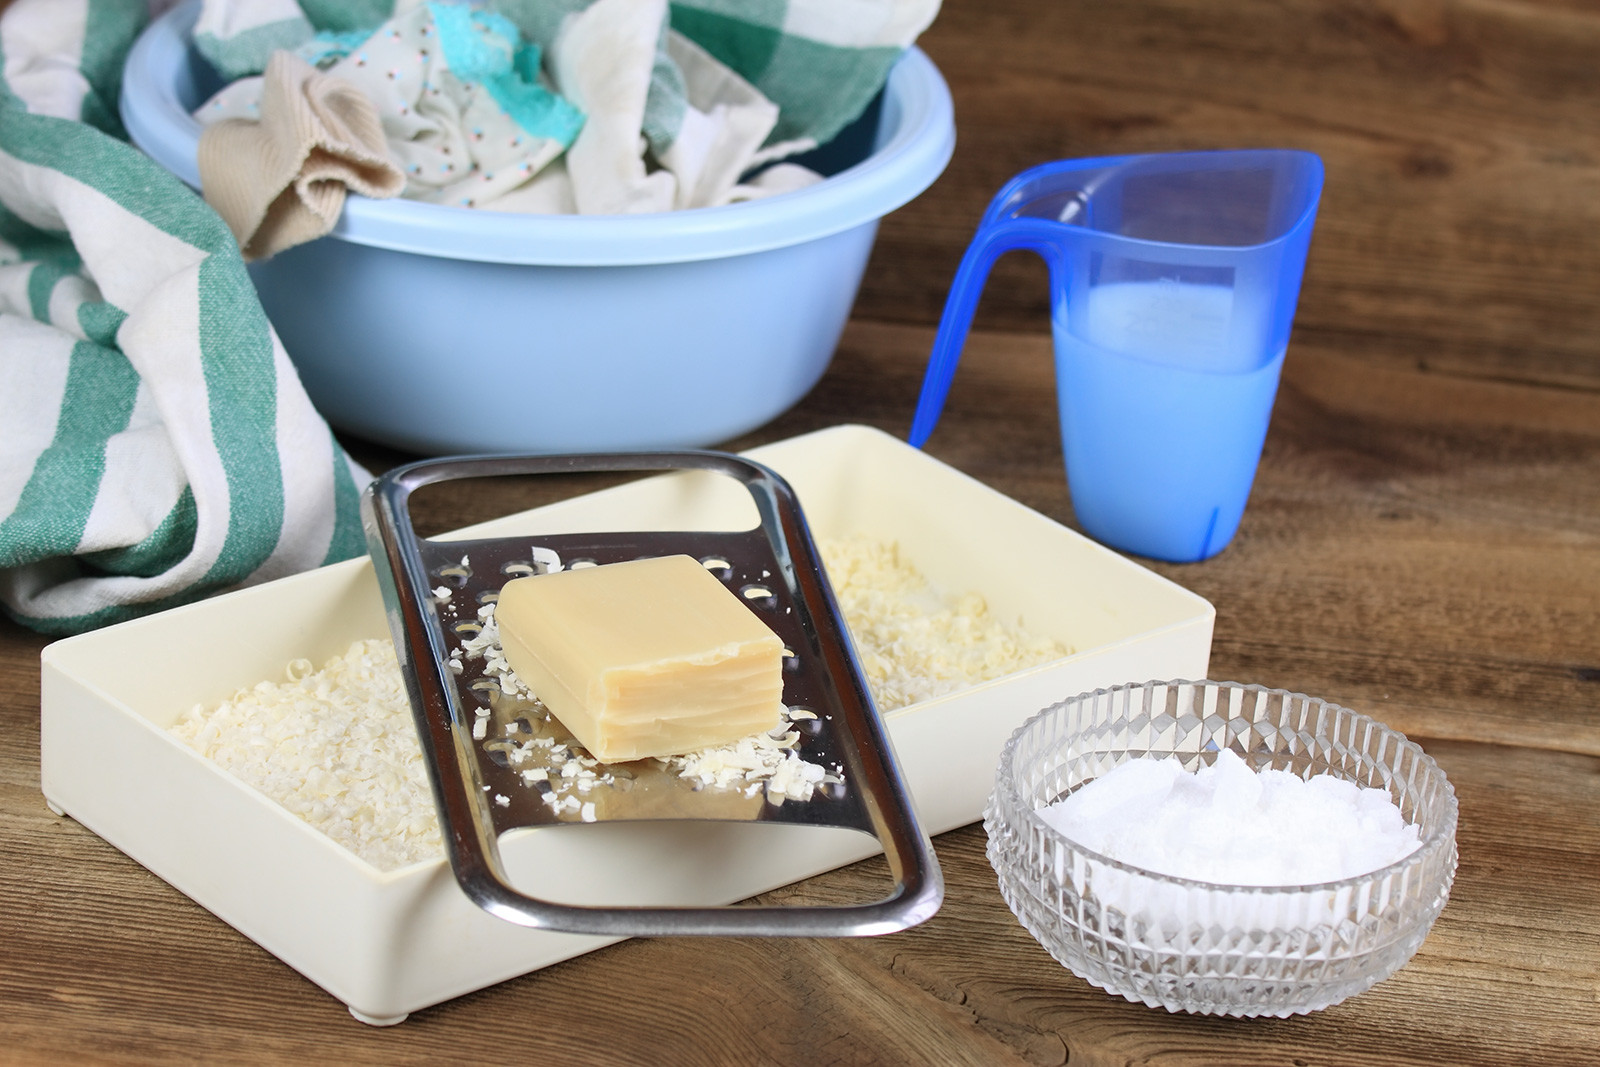 Soap and grated soap, crystalline-sodium in a bowl, and some clothes/cloths in a shallow bucket.